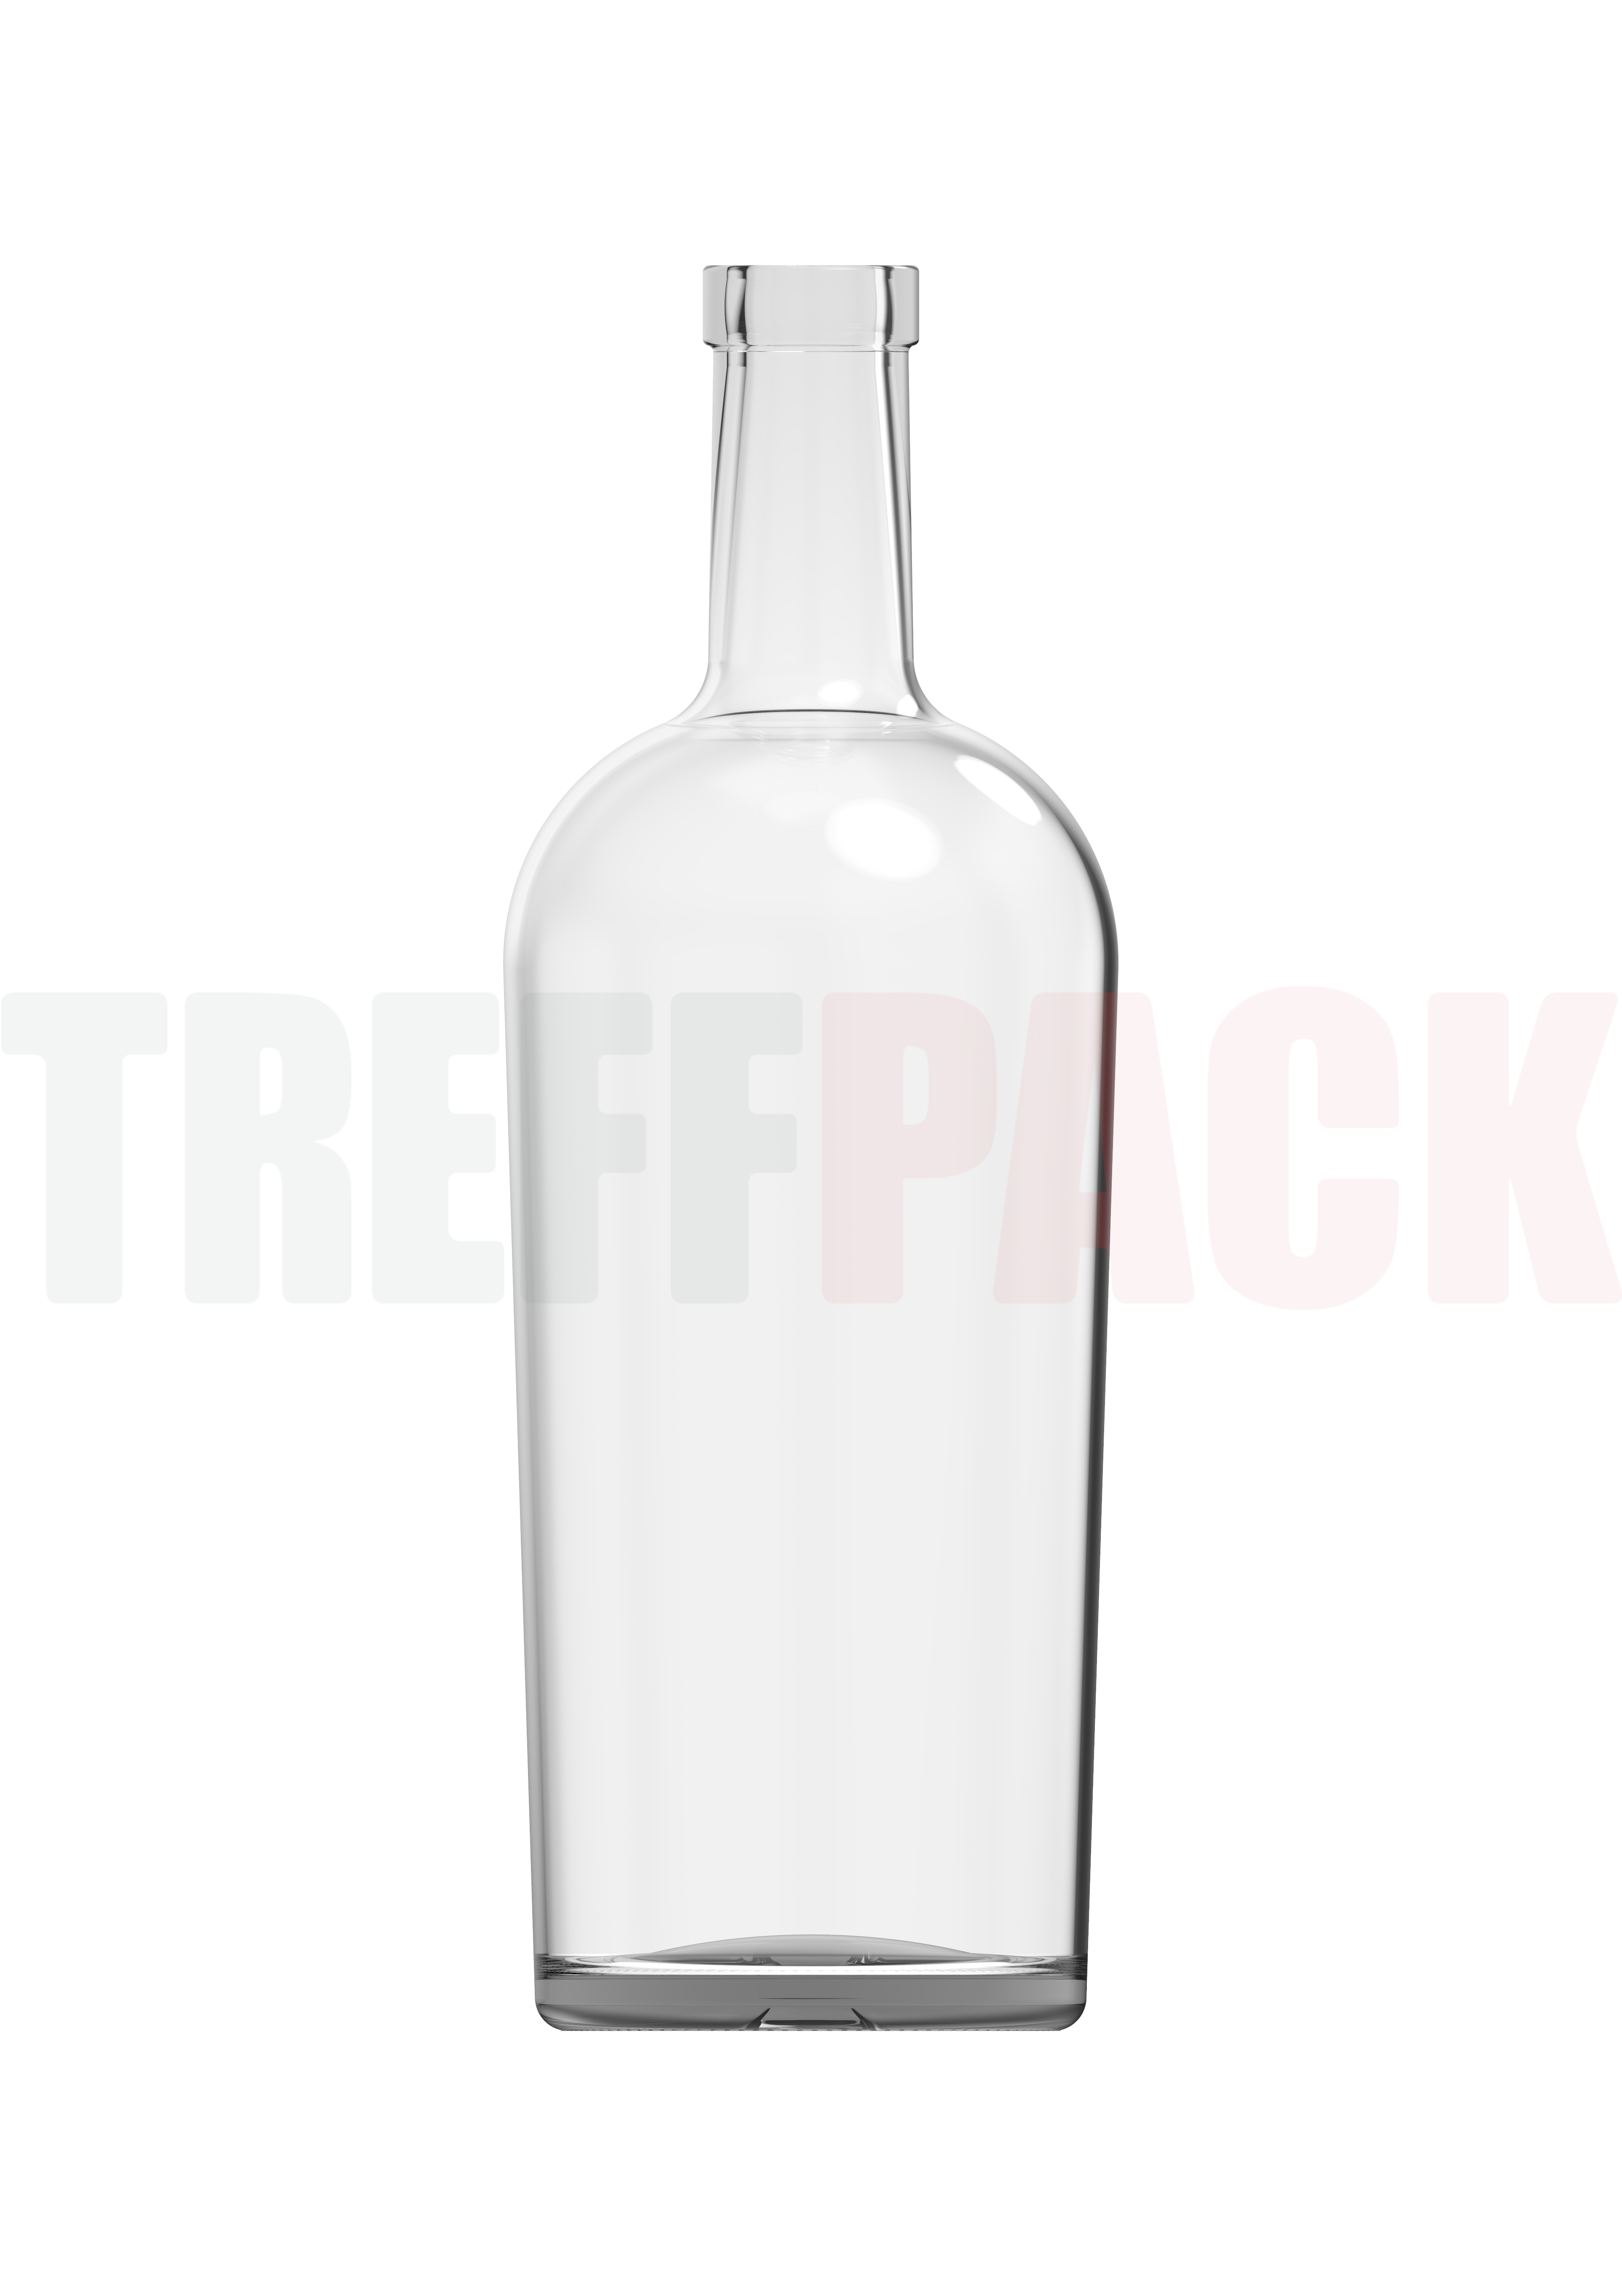 700 ml Glass Spirits Bottle Martinique with Cork Finish